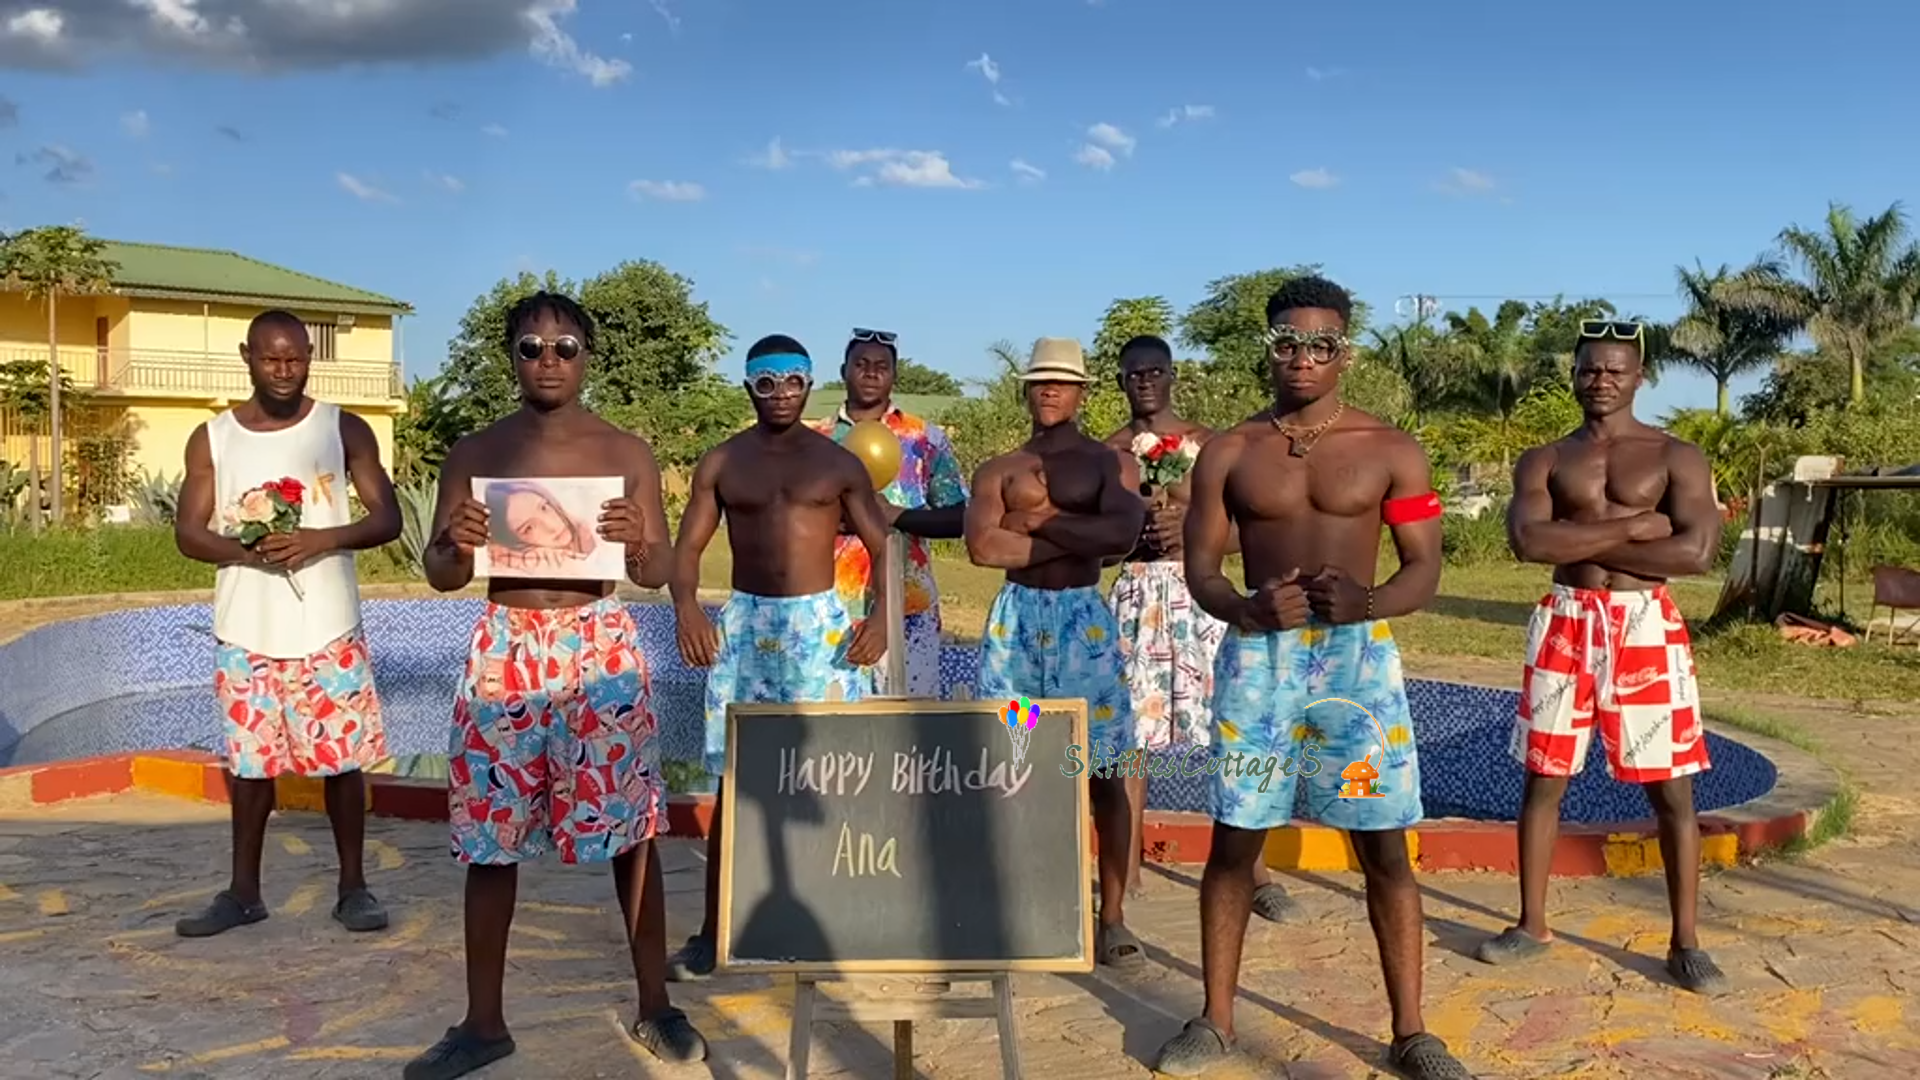 Greetings Video from Africa - AfroSwim Groove - Skittles Cottage